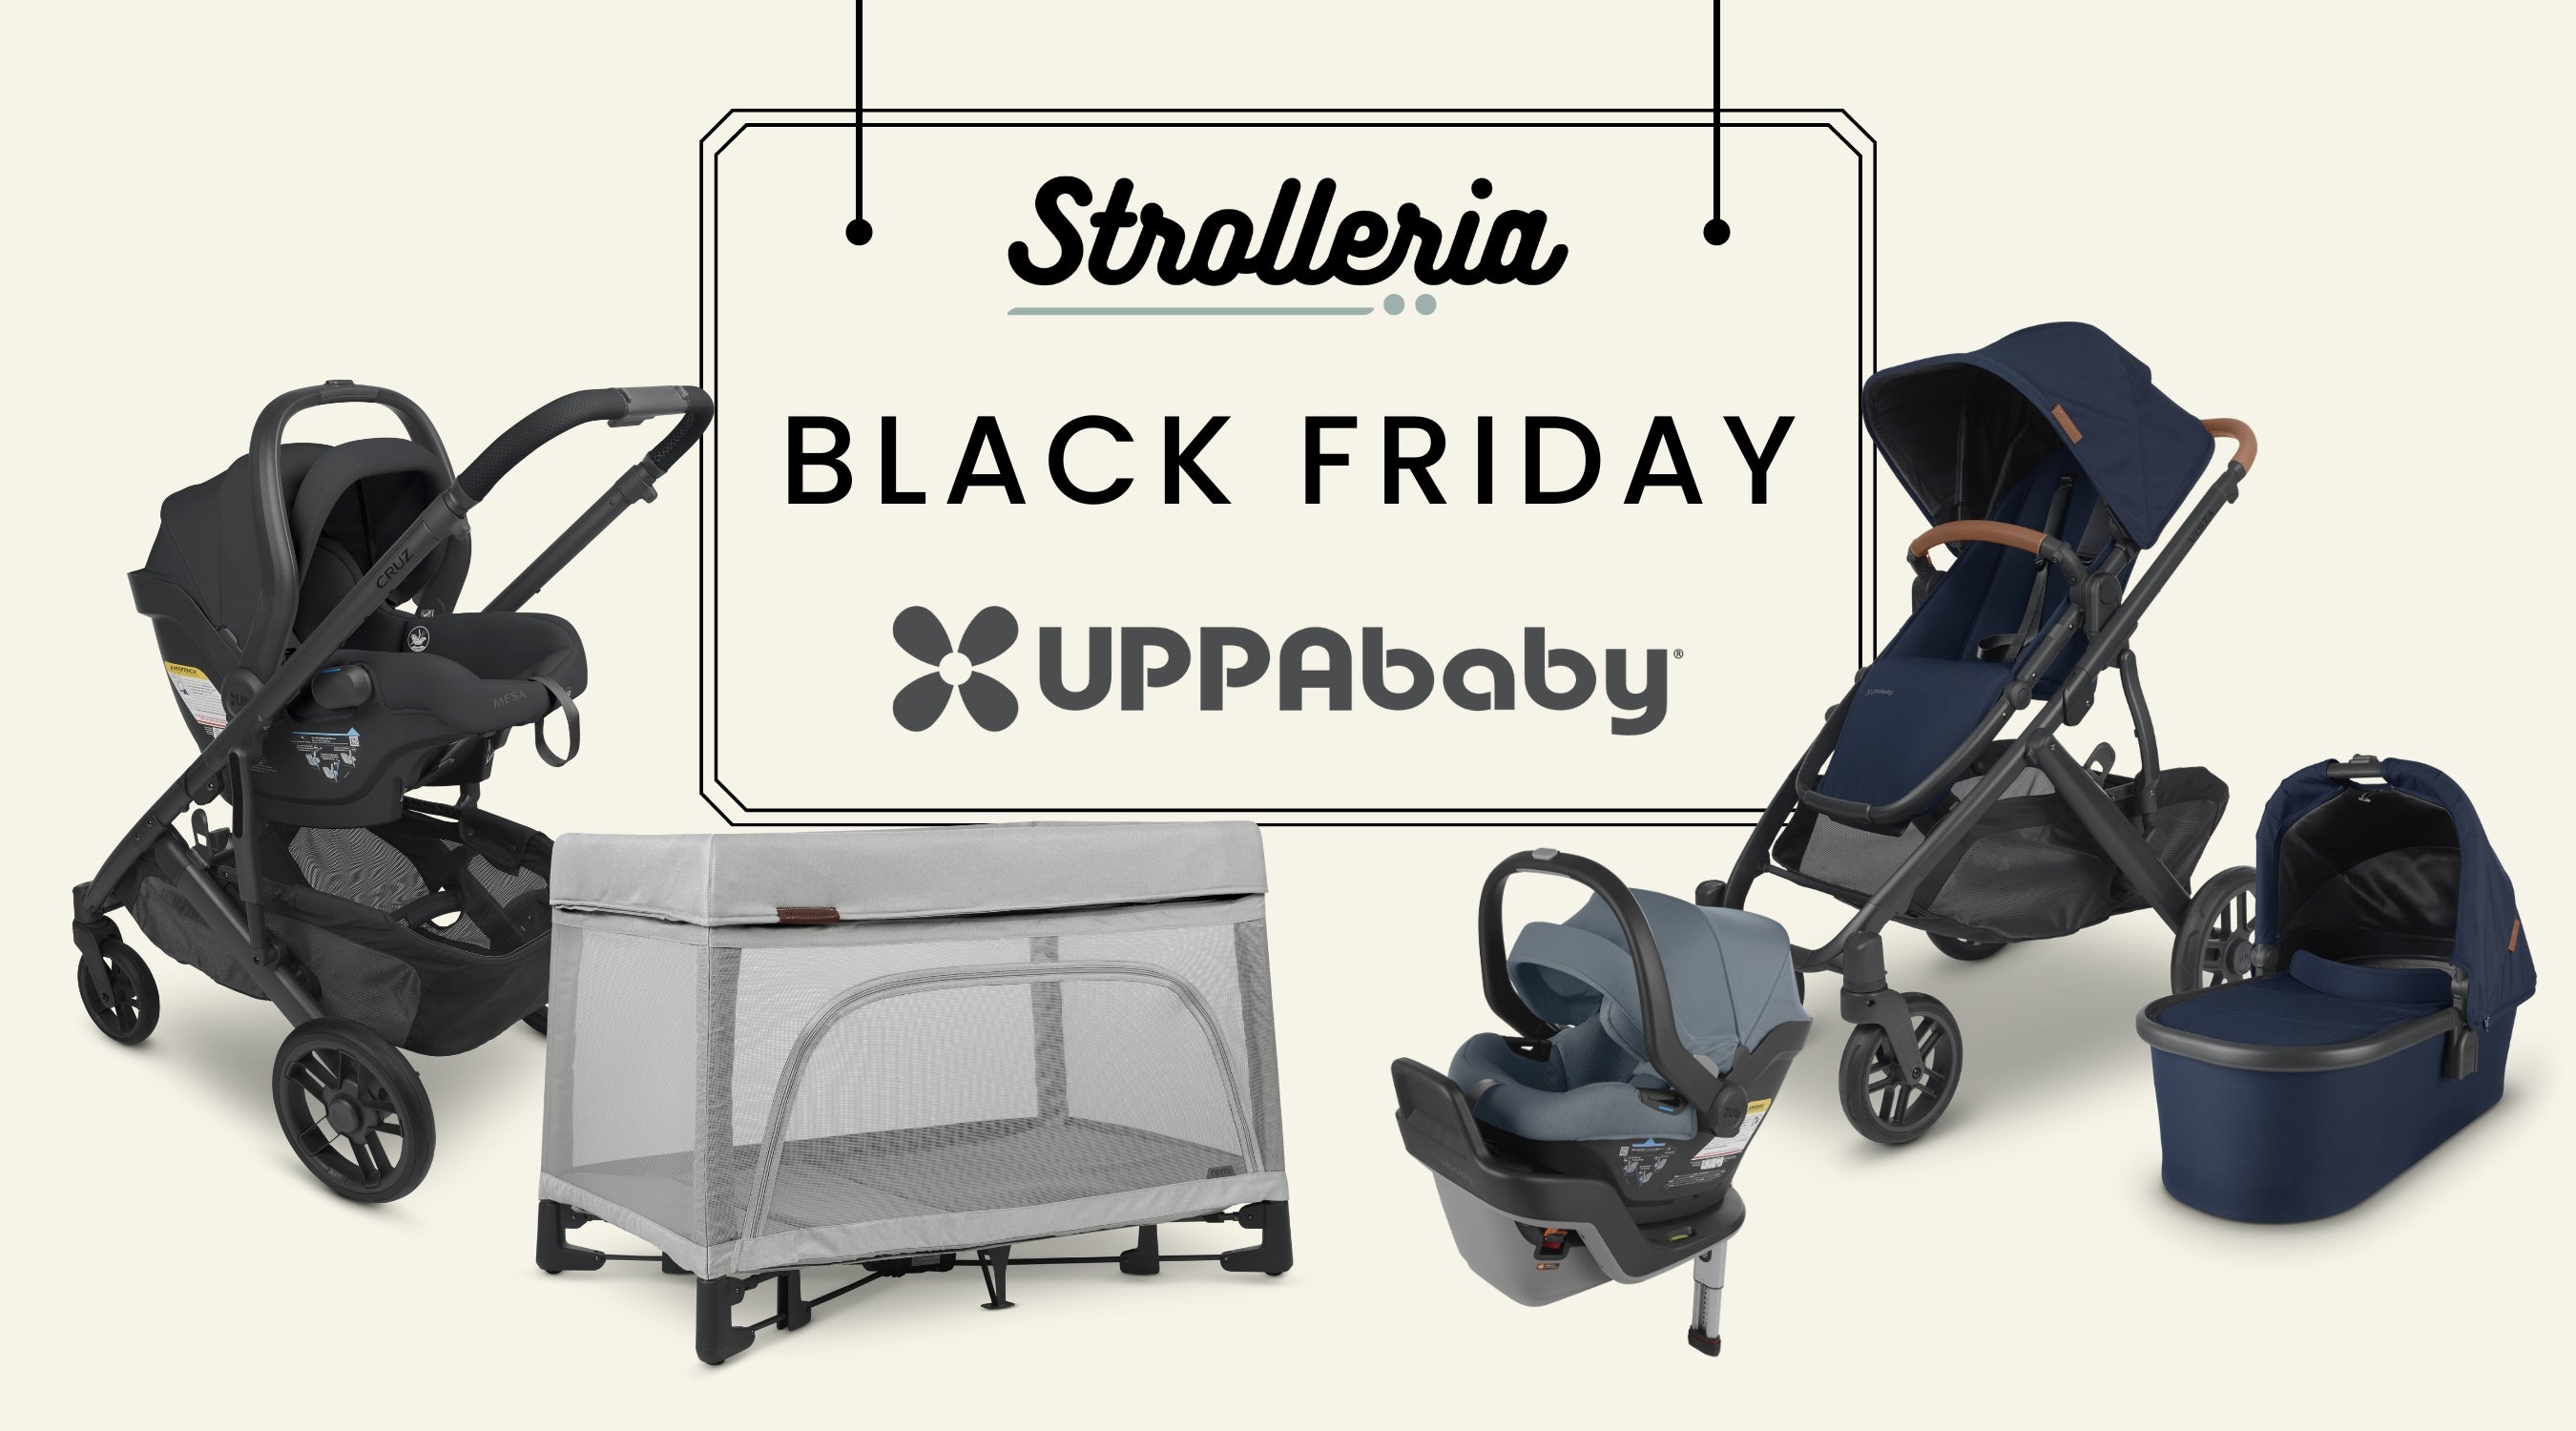 Black Friday UPPAbaby sale